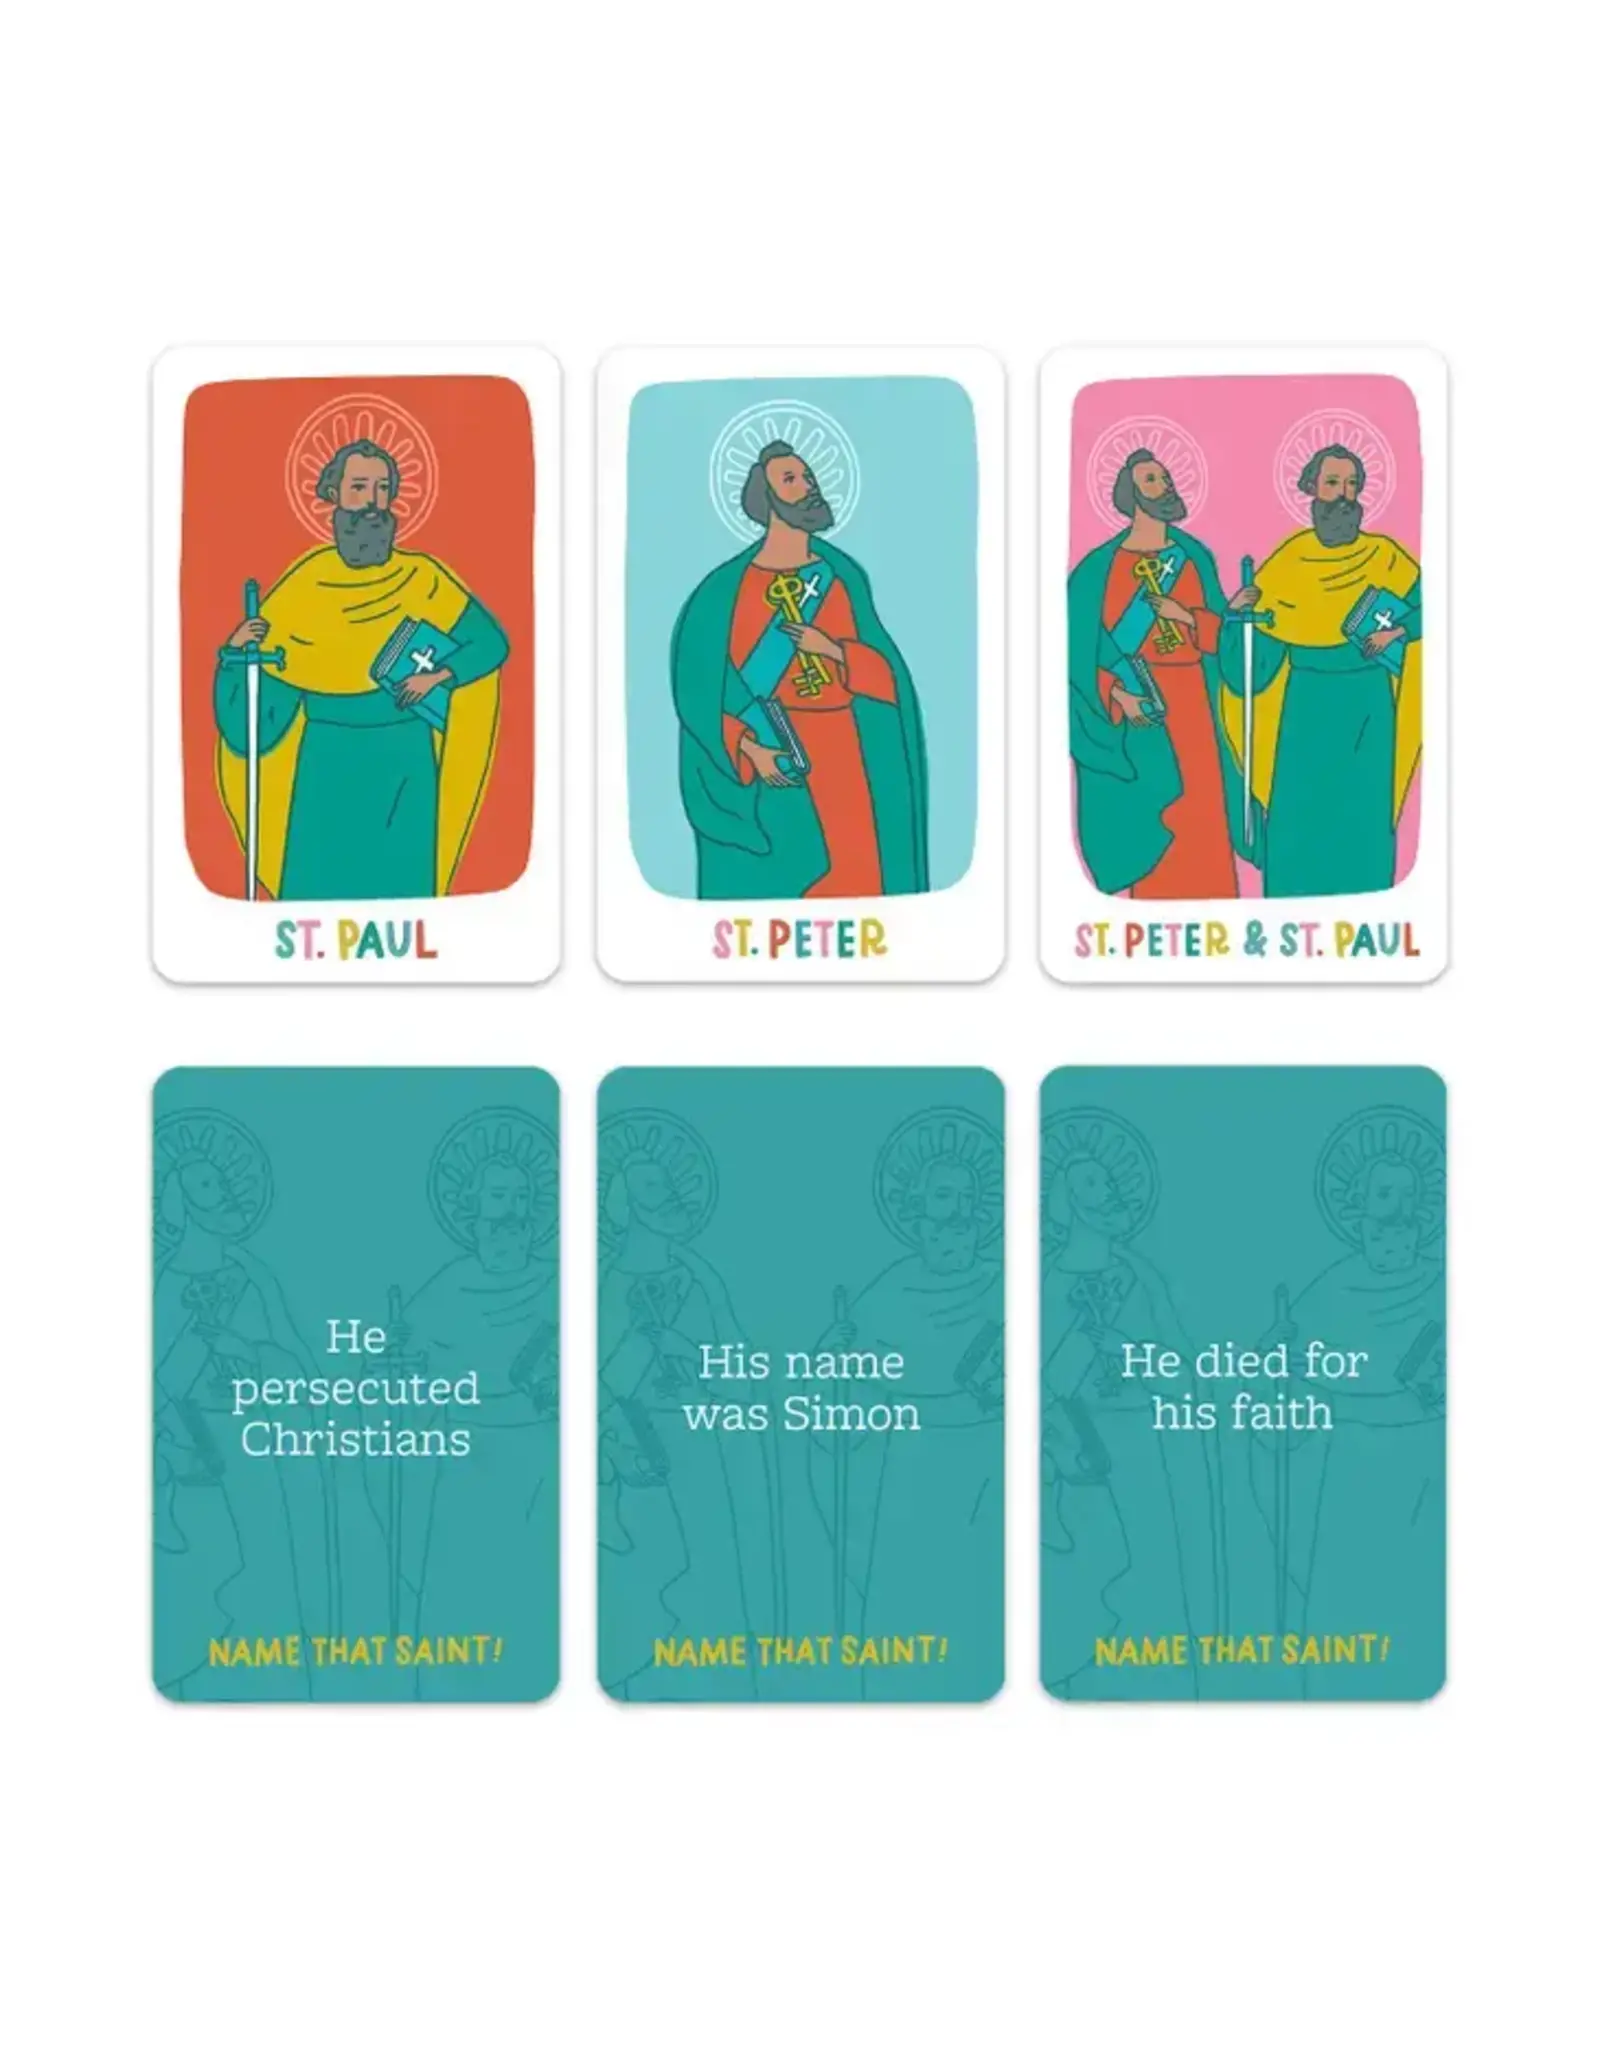 Catholic Family Crate Name That Saint: St. Peter & St. Paul Edition Game